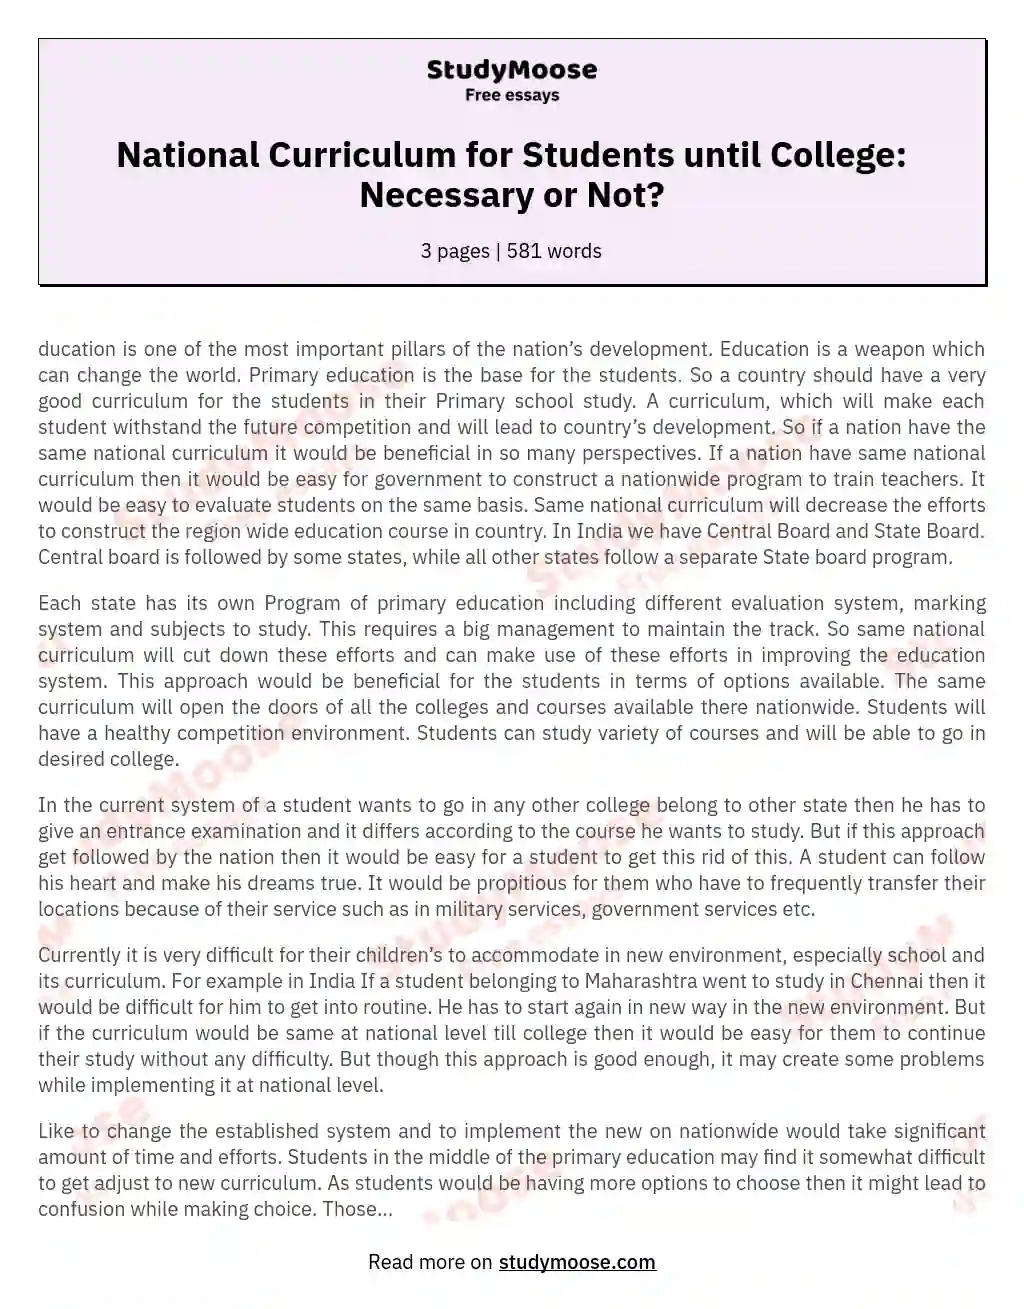 National Curriculum for Students until College: Necessary or Not? essay